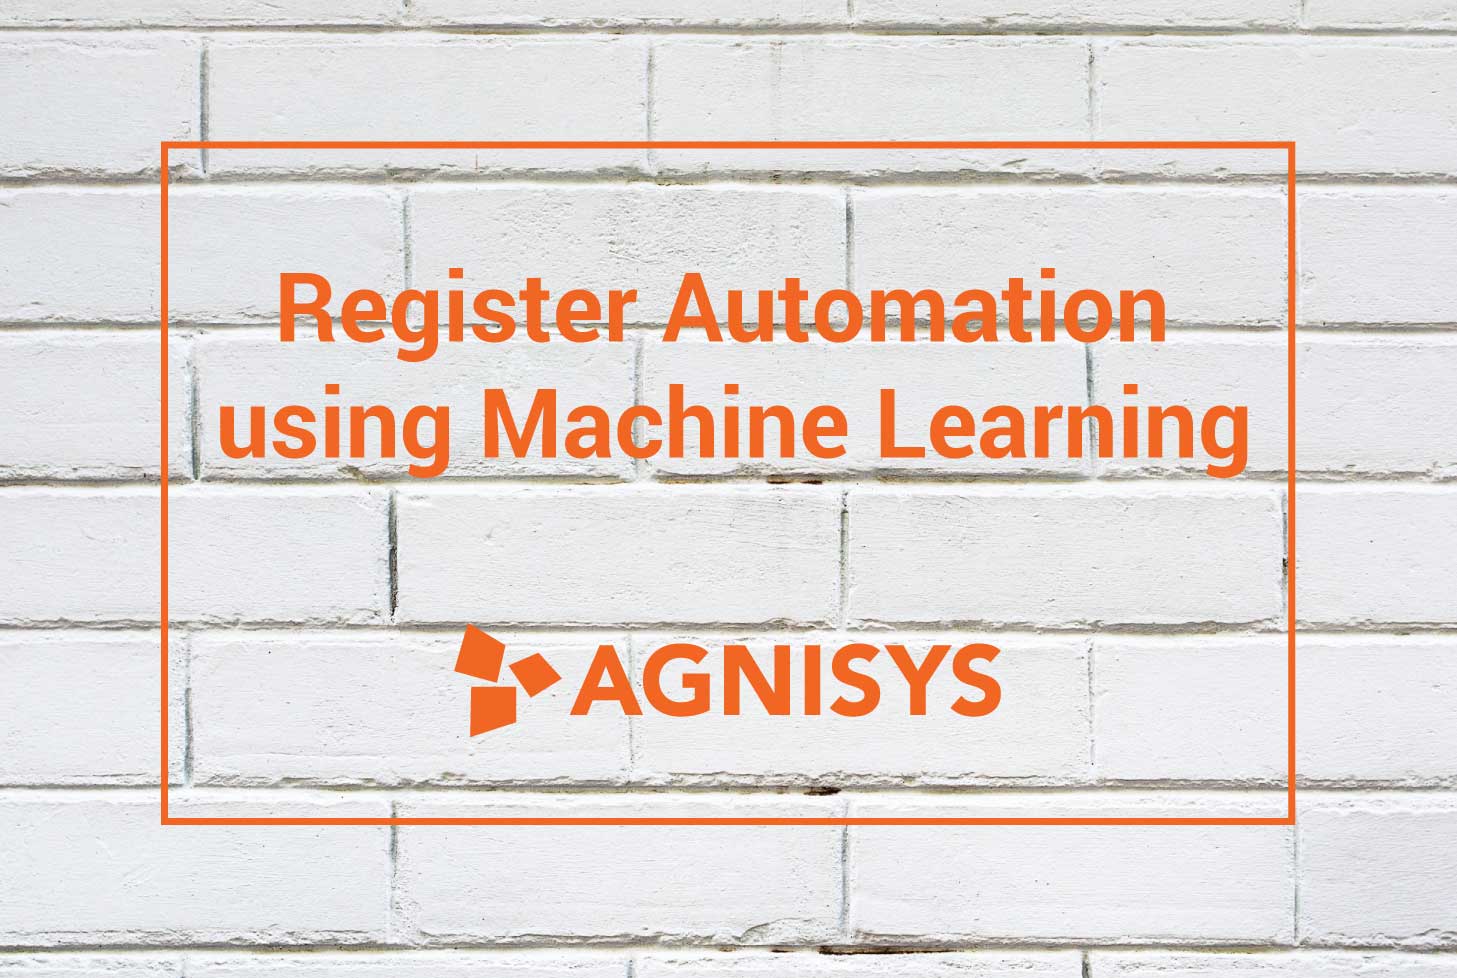 Register Automation using Machine Learning